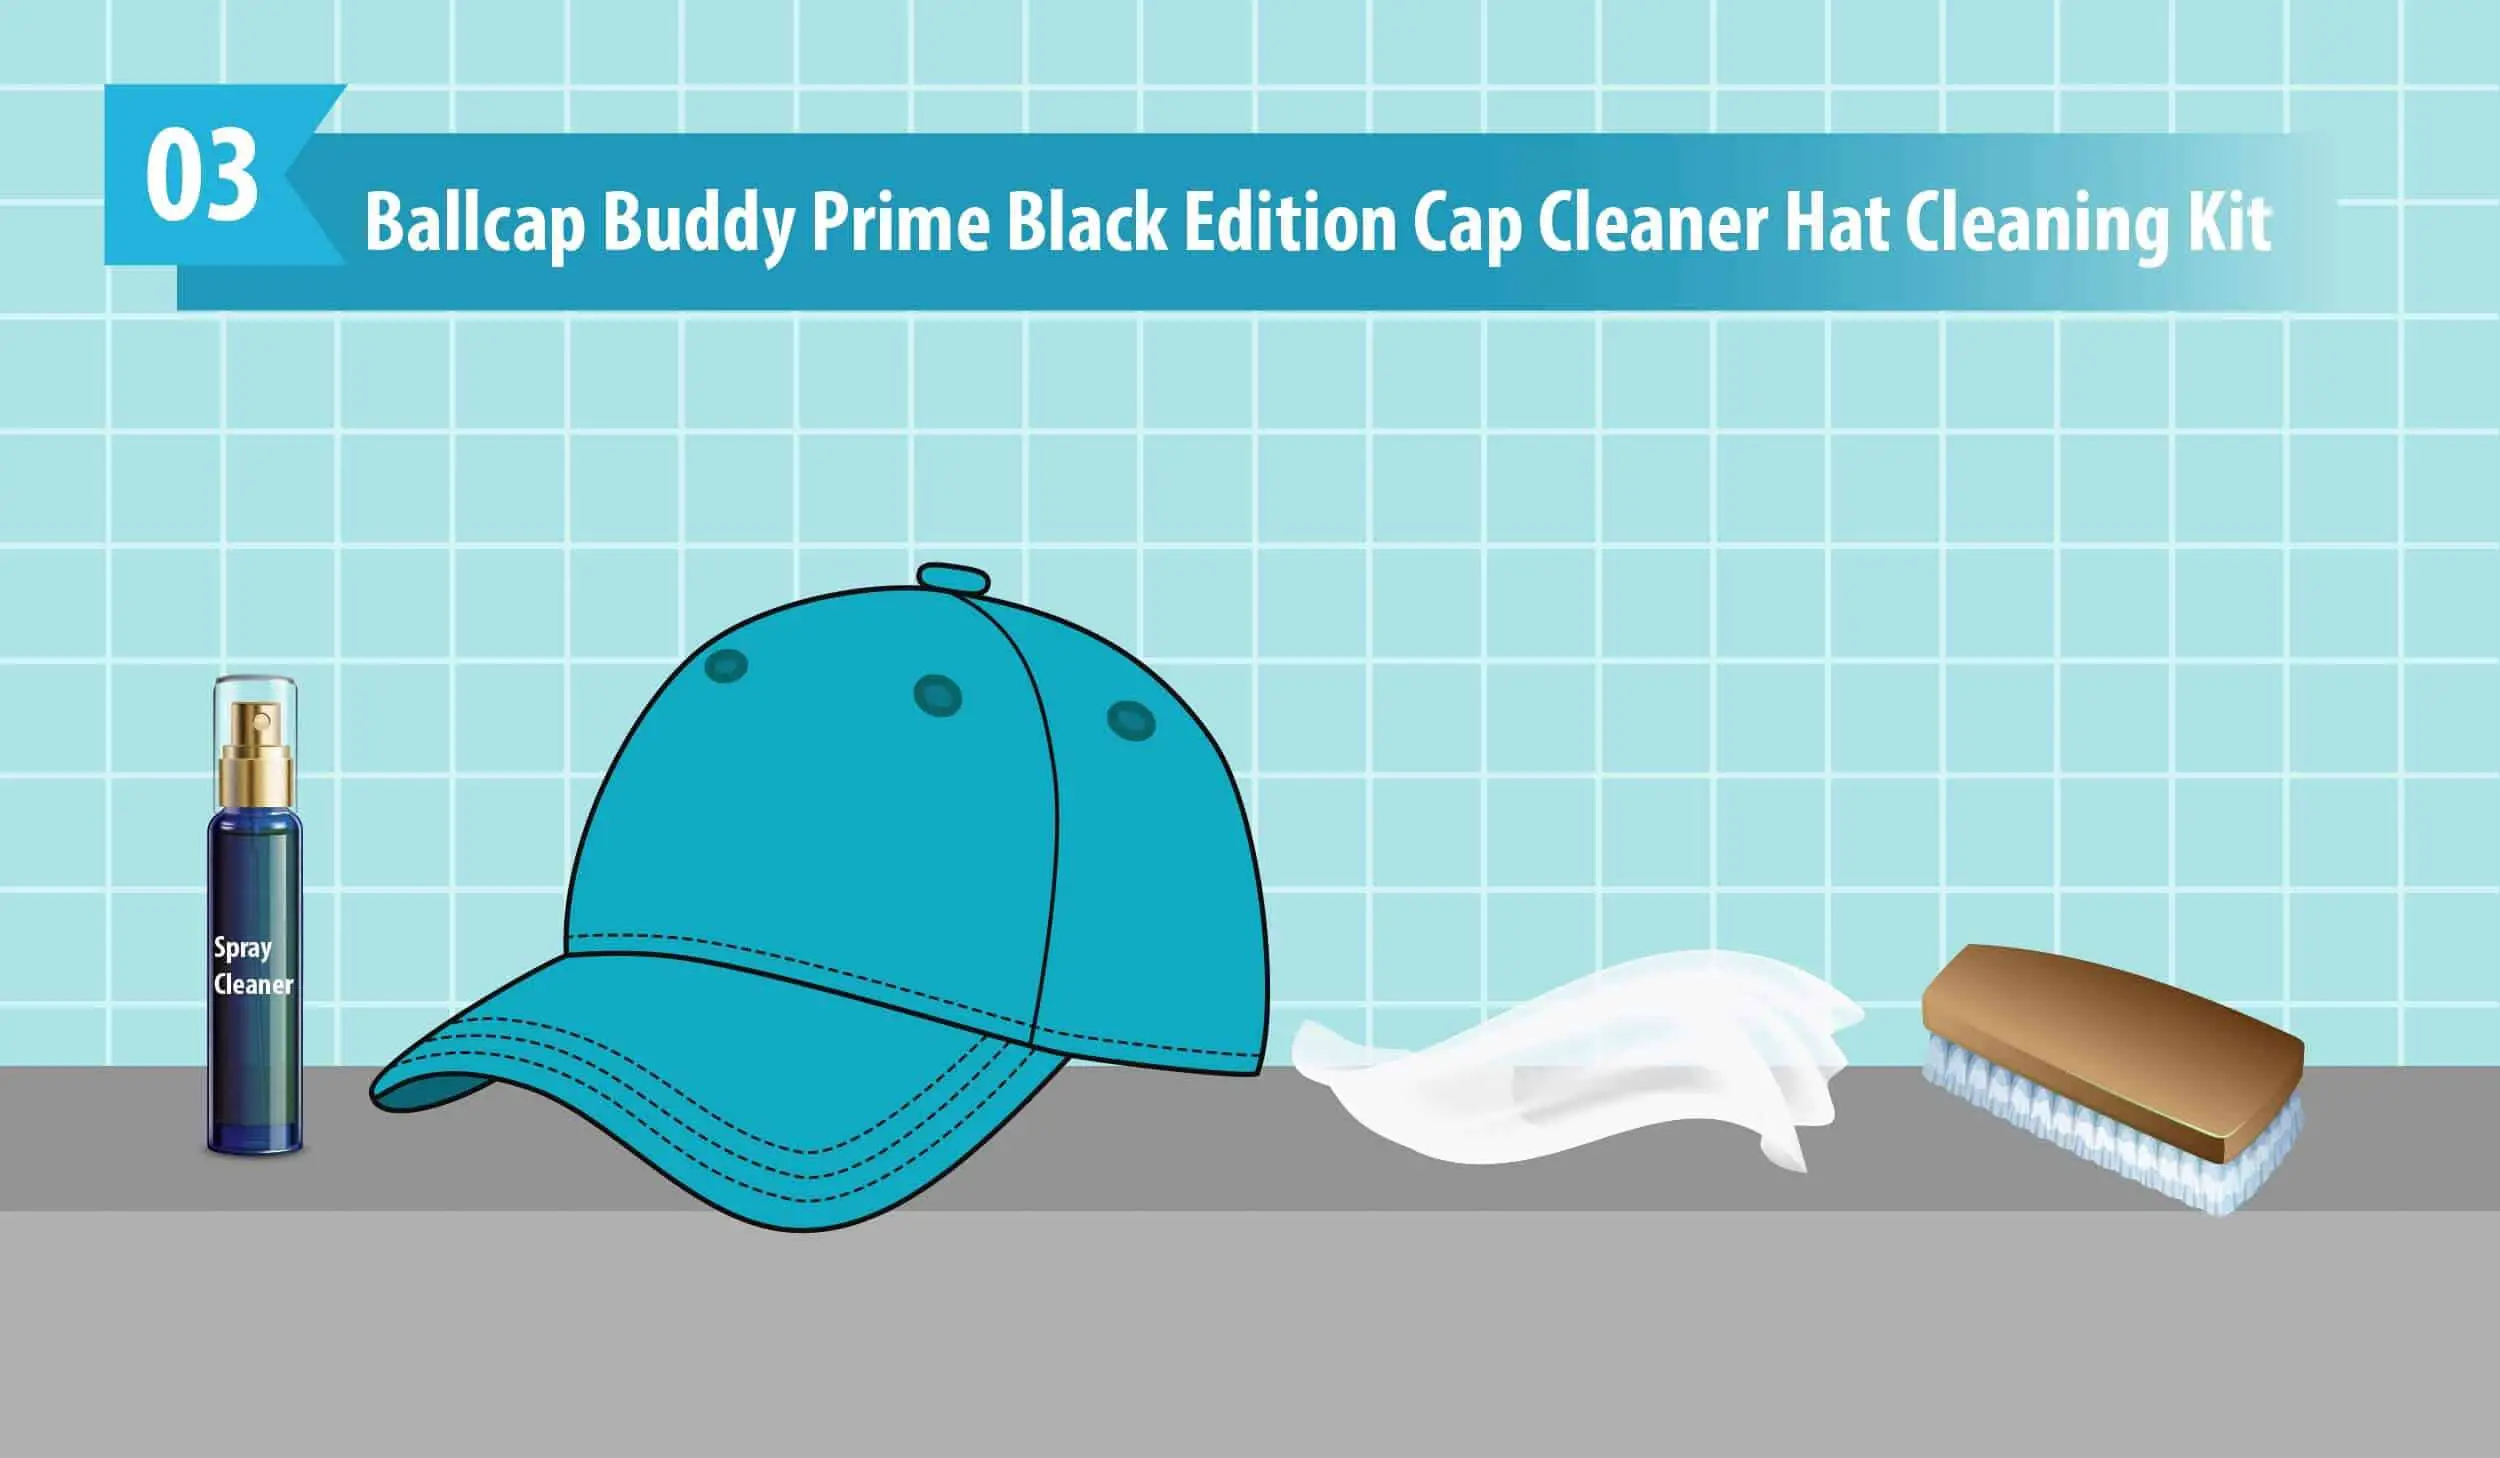 Ballcap Buddy Prime Black Edition Cap Cleaner Hat Cleaning Kit